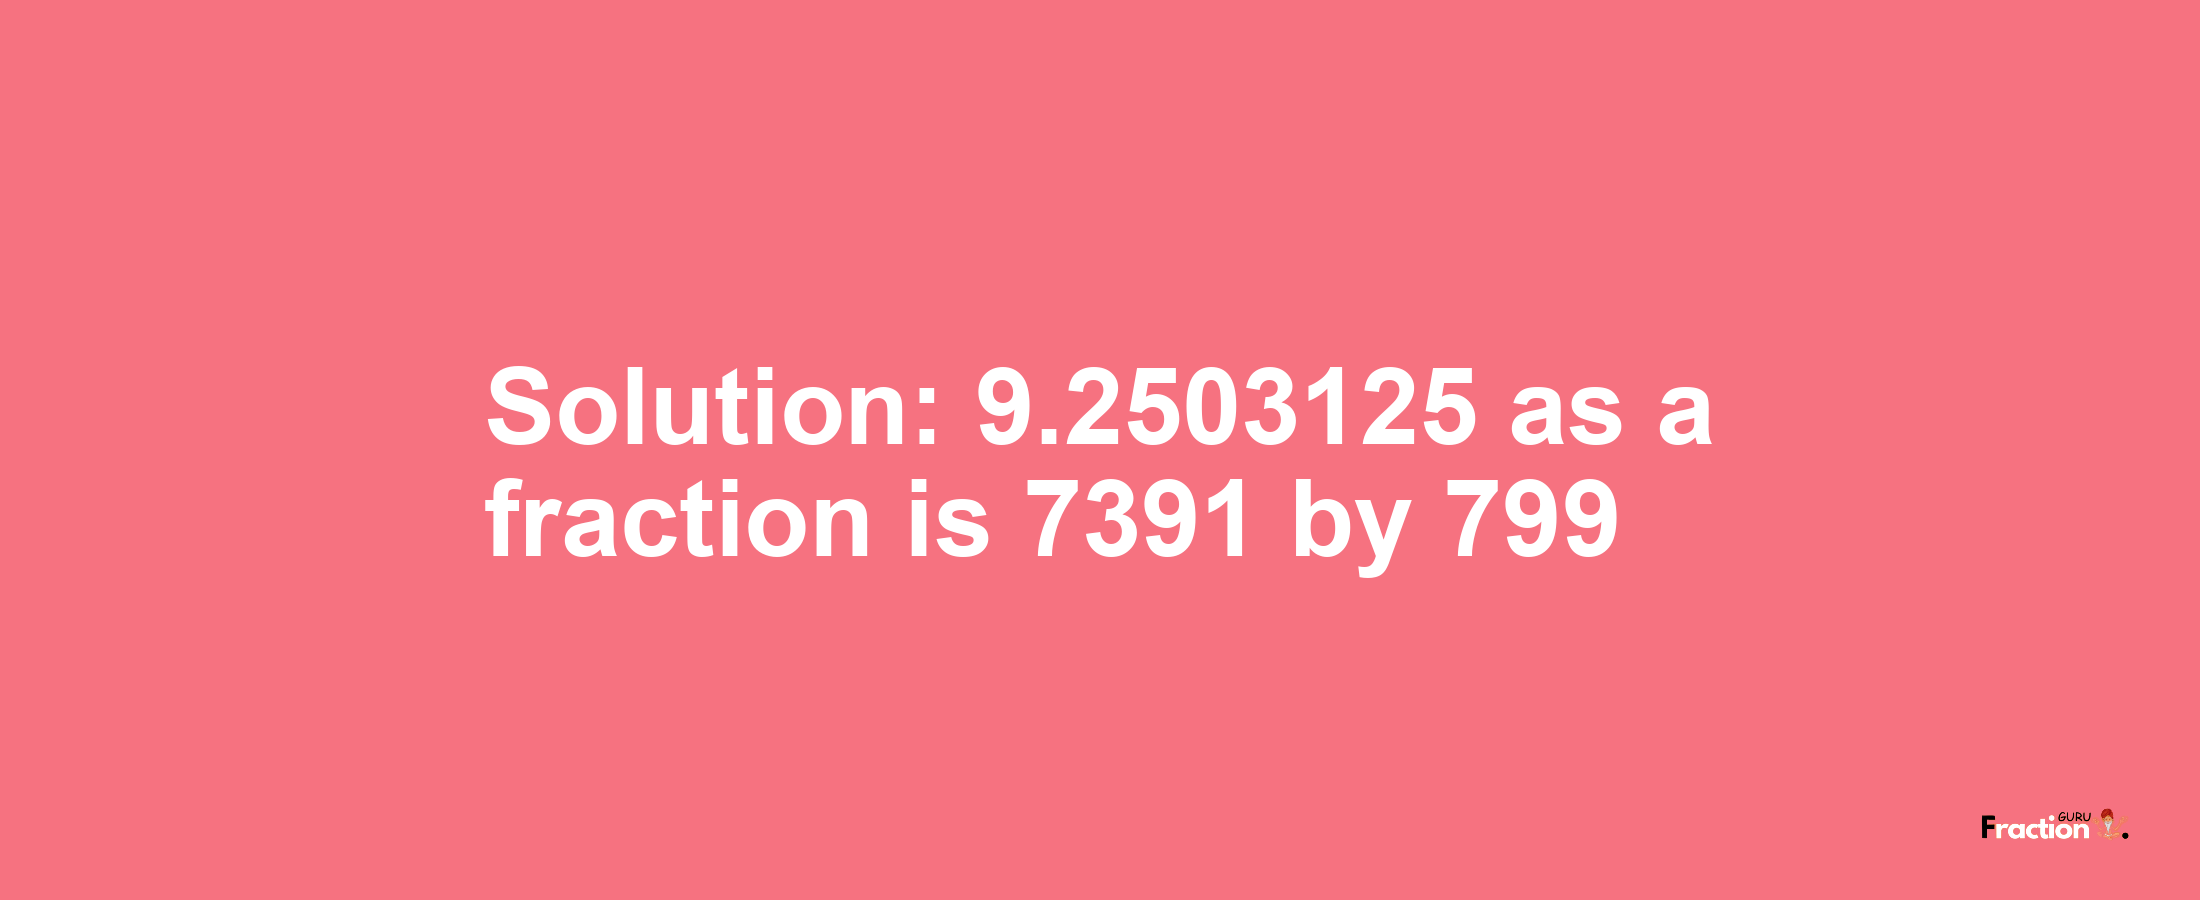 Solution:9.2503125 as a fraction is 7391/799